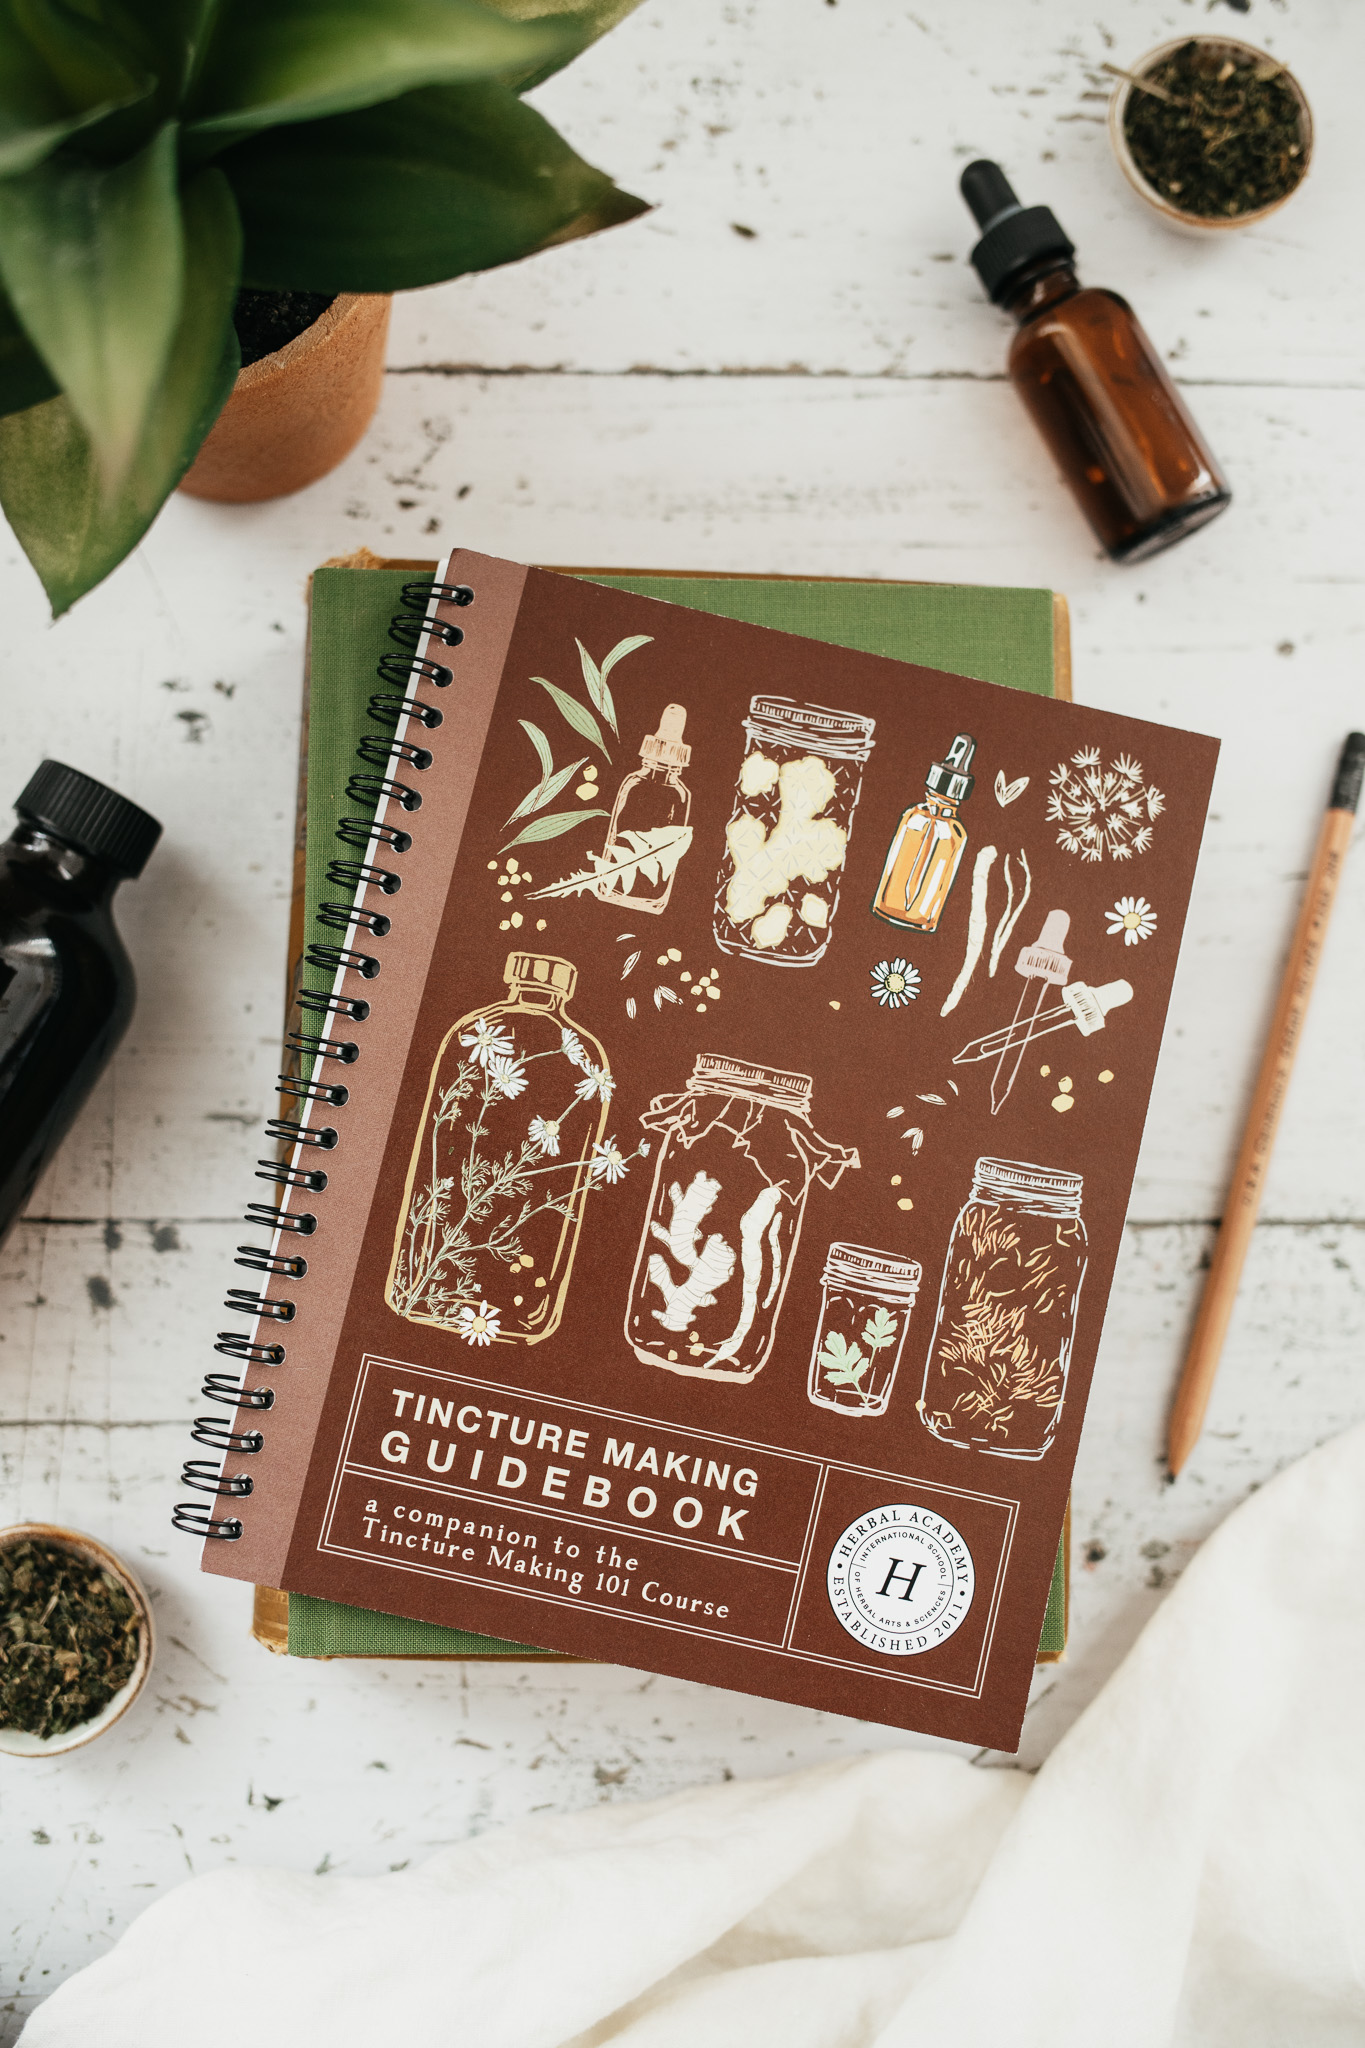 Tincture Making Guidebook by Herbal Academy